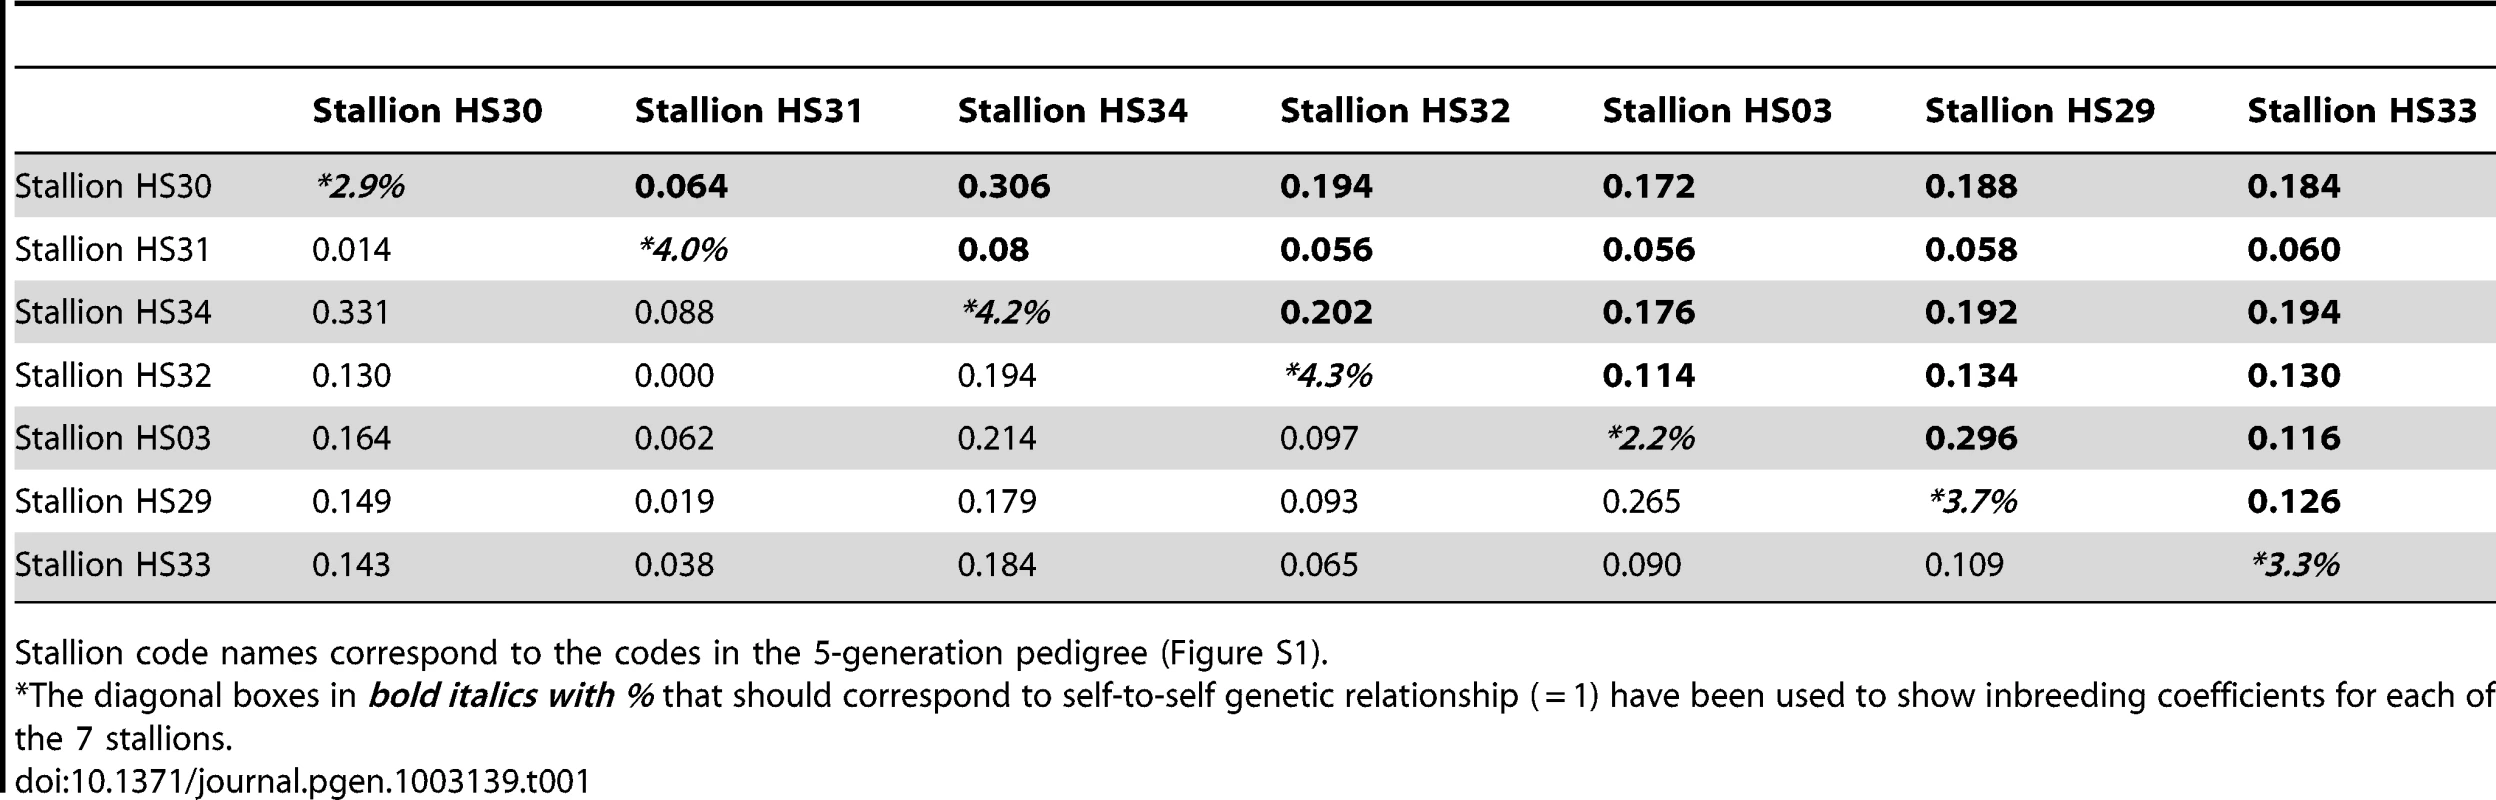 Inbreeding coefficients (diagonal boxes) and genetic relationship coefficients of and among the seven affected stallions calculated from i) pedigree data in bold (upper triangle of the matrix) and from ii) SNP genotyping data in normal font (lower triangle of the matrix).